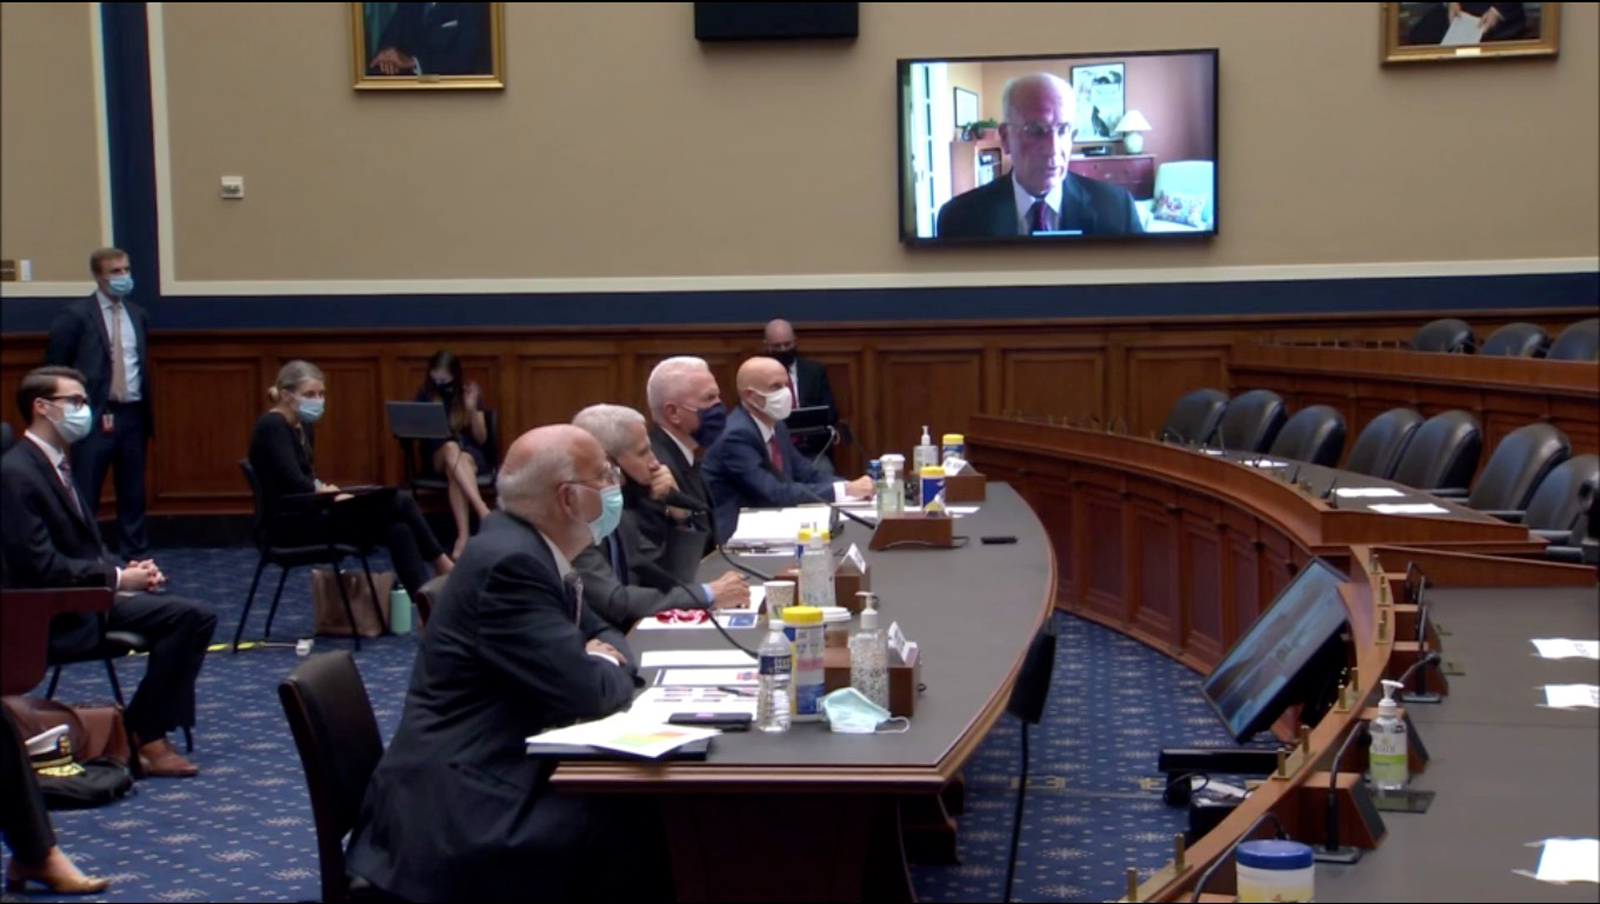 Rep. Peter Welch speaks to the witnesses.